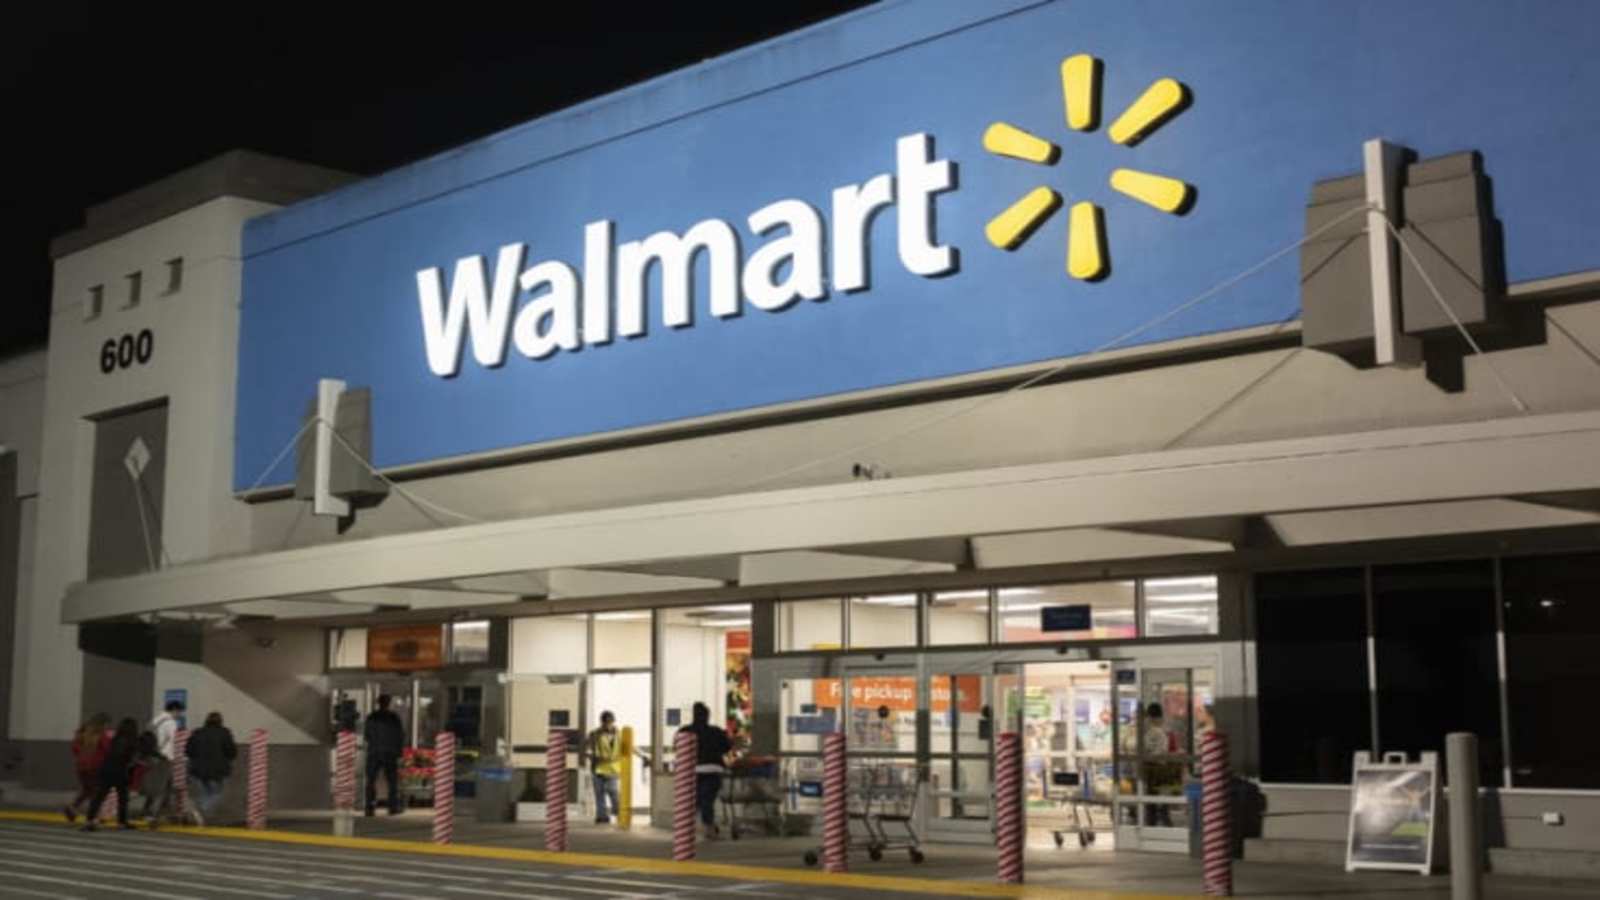 Retail giant Walmart to invest US$350bn in US manufacturing to revive economy, create jobs